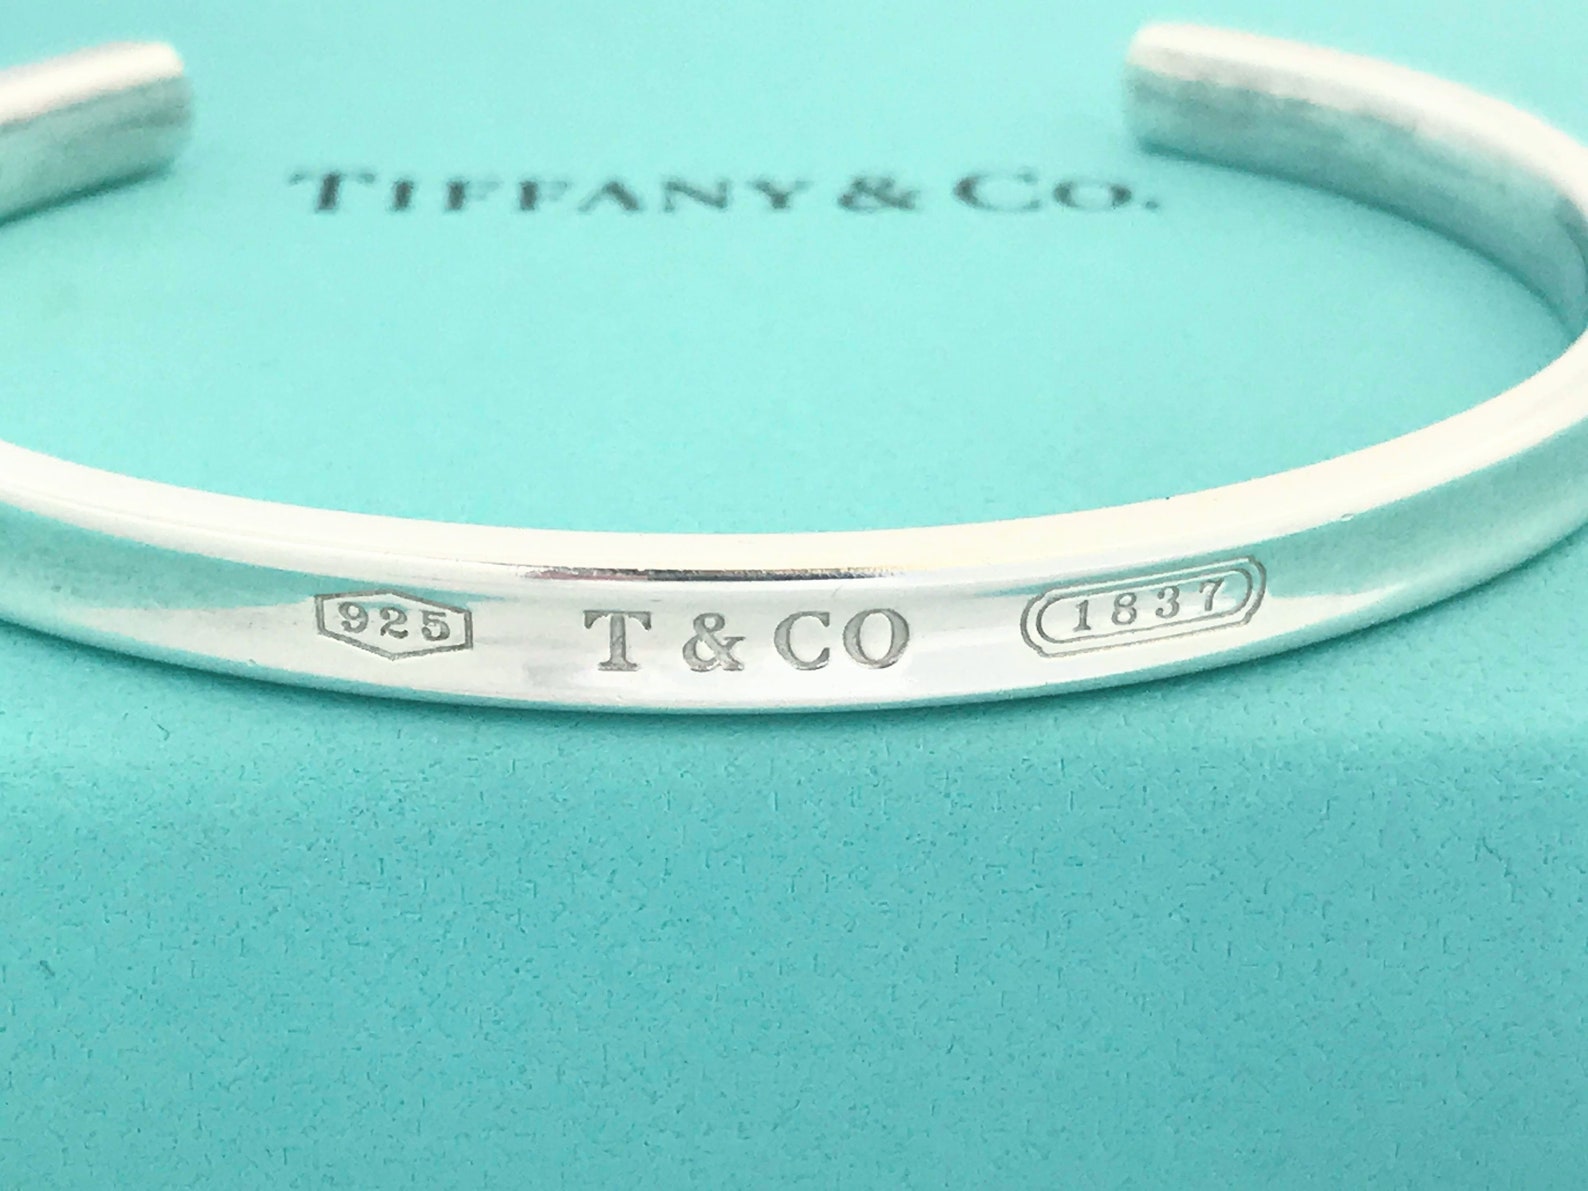 Authentic Tiffany Co. 1837 Sterling Silver 925 Cuff Bracelet | Etsy